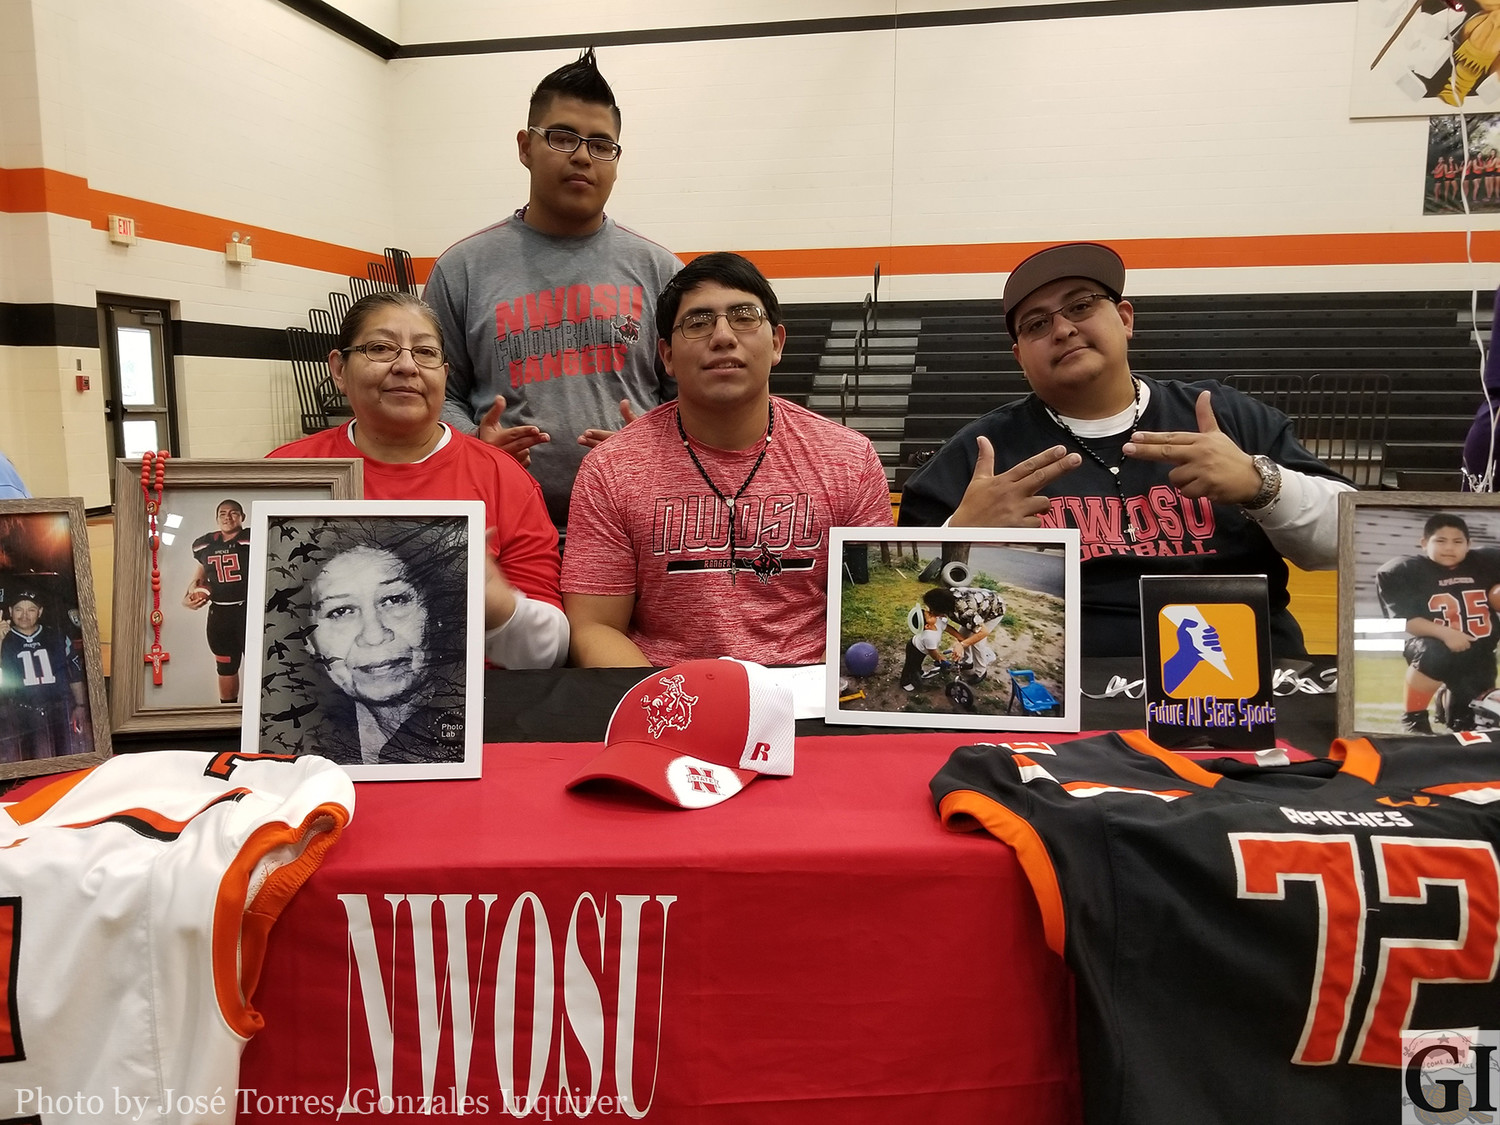 Juan “Bull” Licea signed on with Northwestern Oklahoma State University on National Signing Day last week.